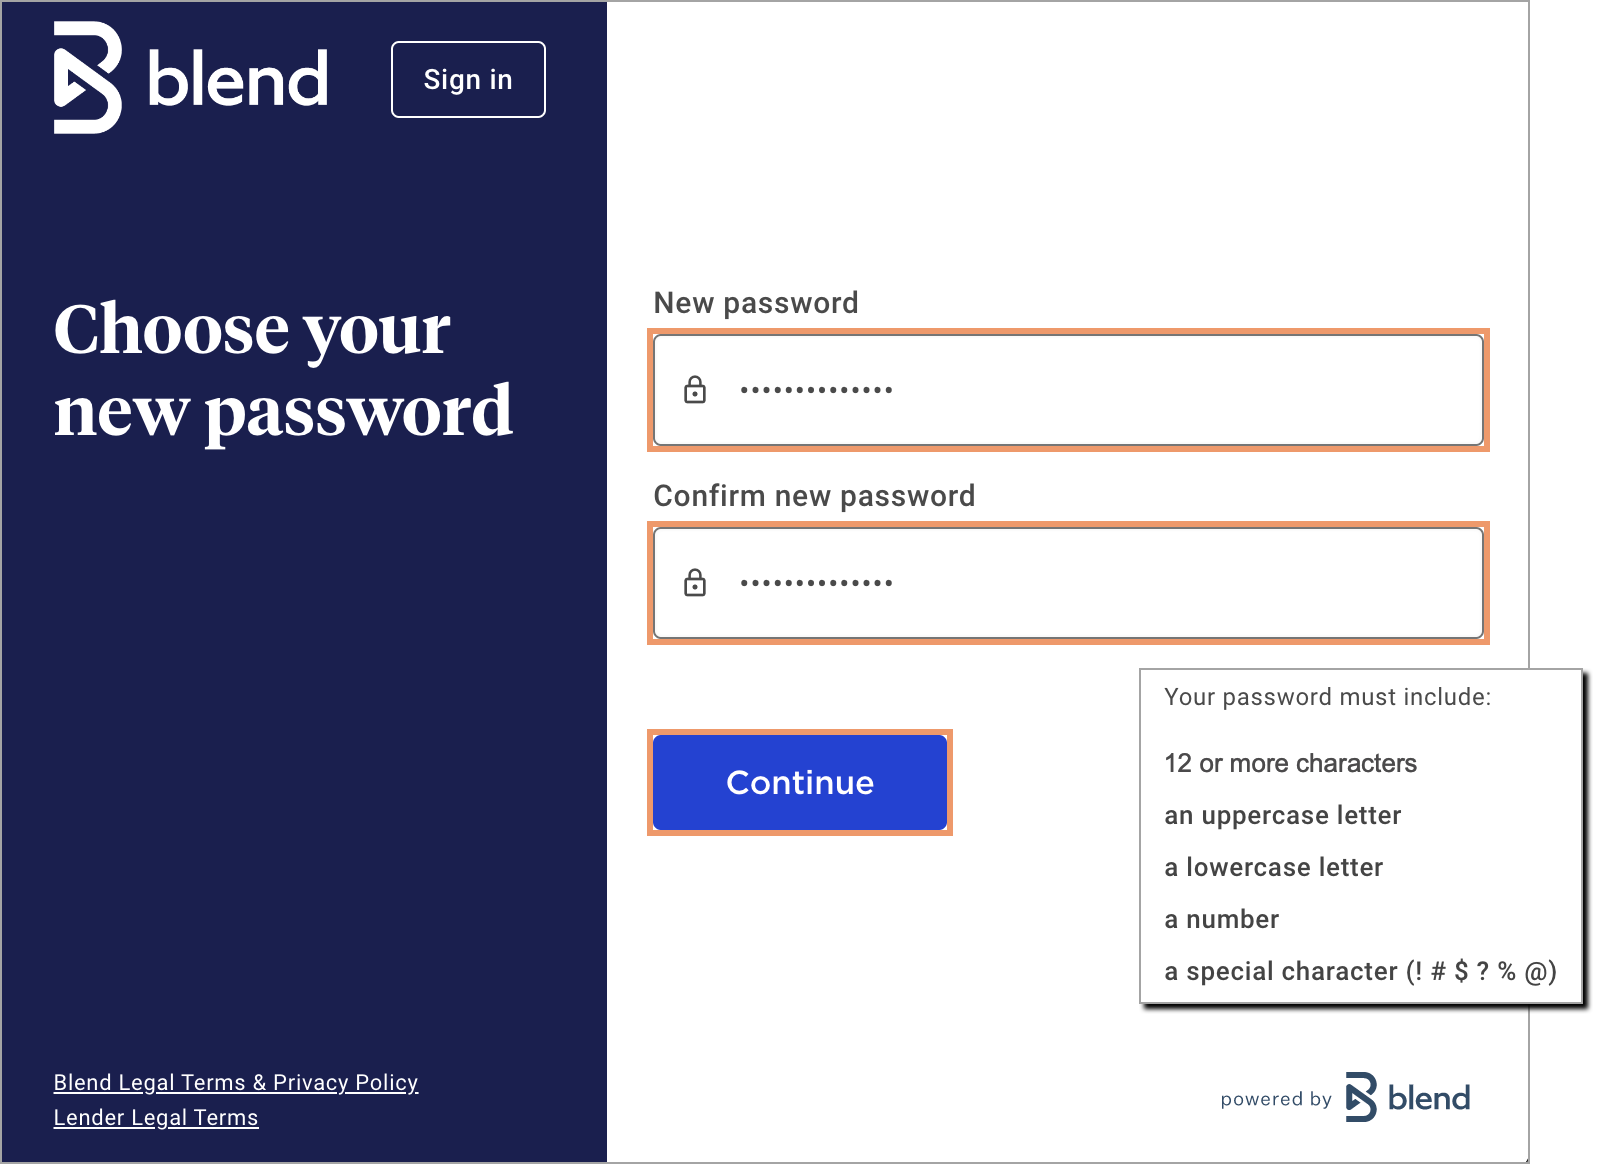 blend_new_password.png